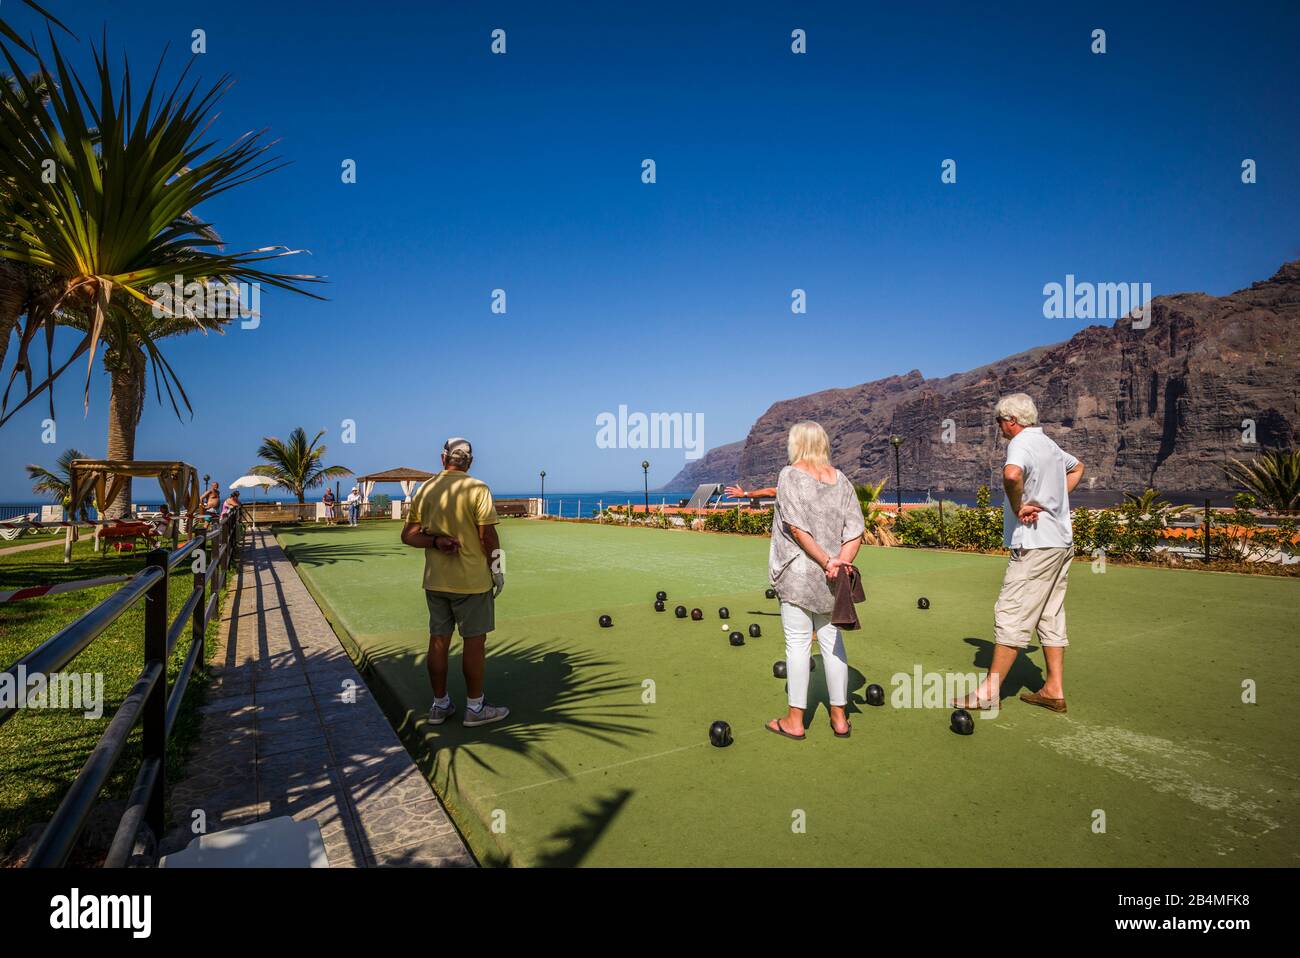 Spain, Canary Islands, Tenerife Island, Los Gigantes, lawn bowling with players, NR Stock Photo